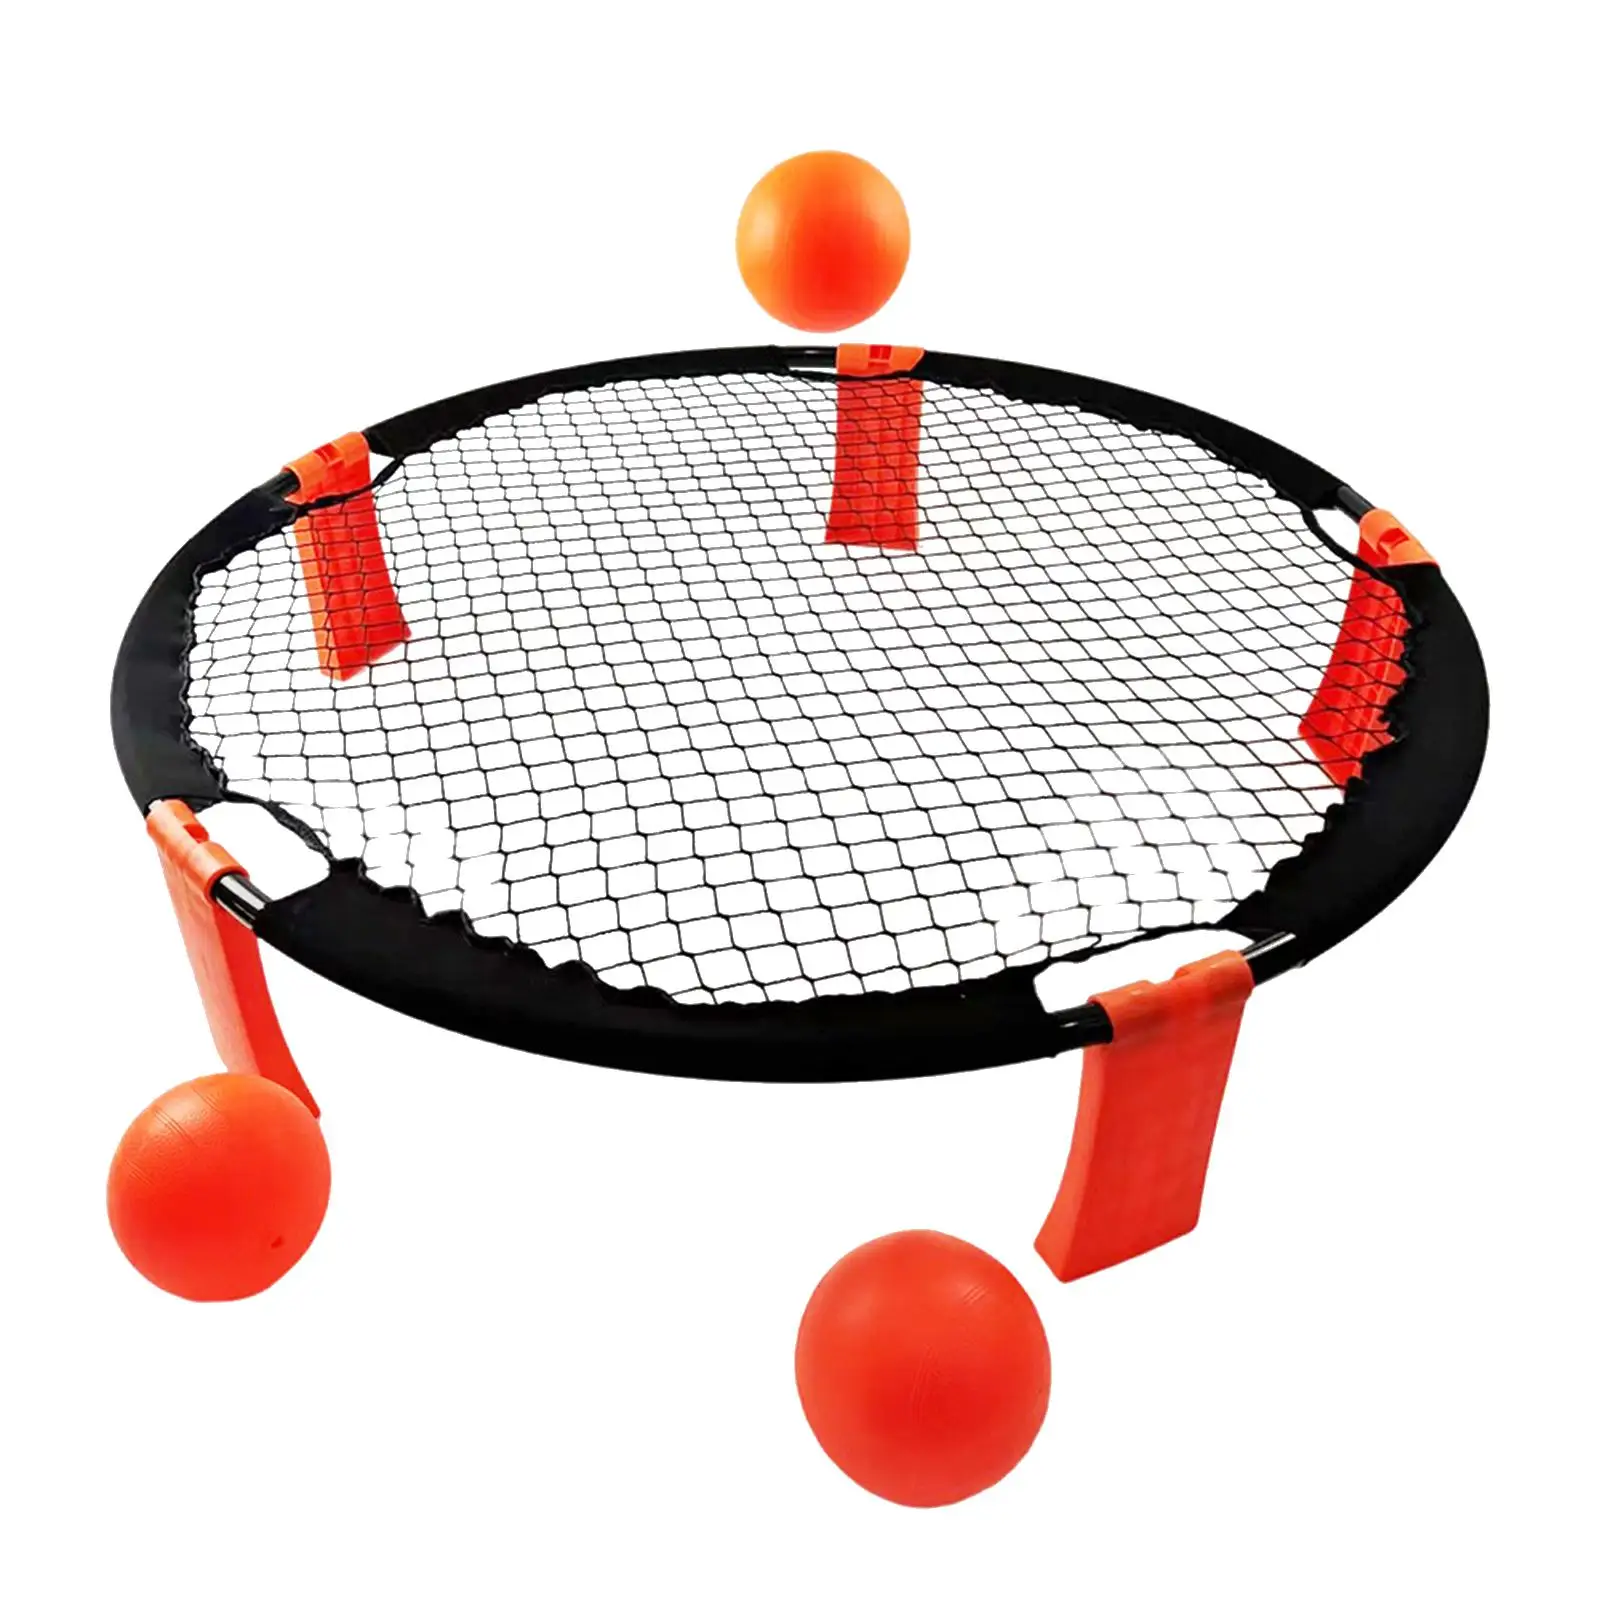 Volleyball Spike Game Set with 3 Balls Volleyball Net Lawn Fitness Equipment